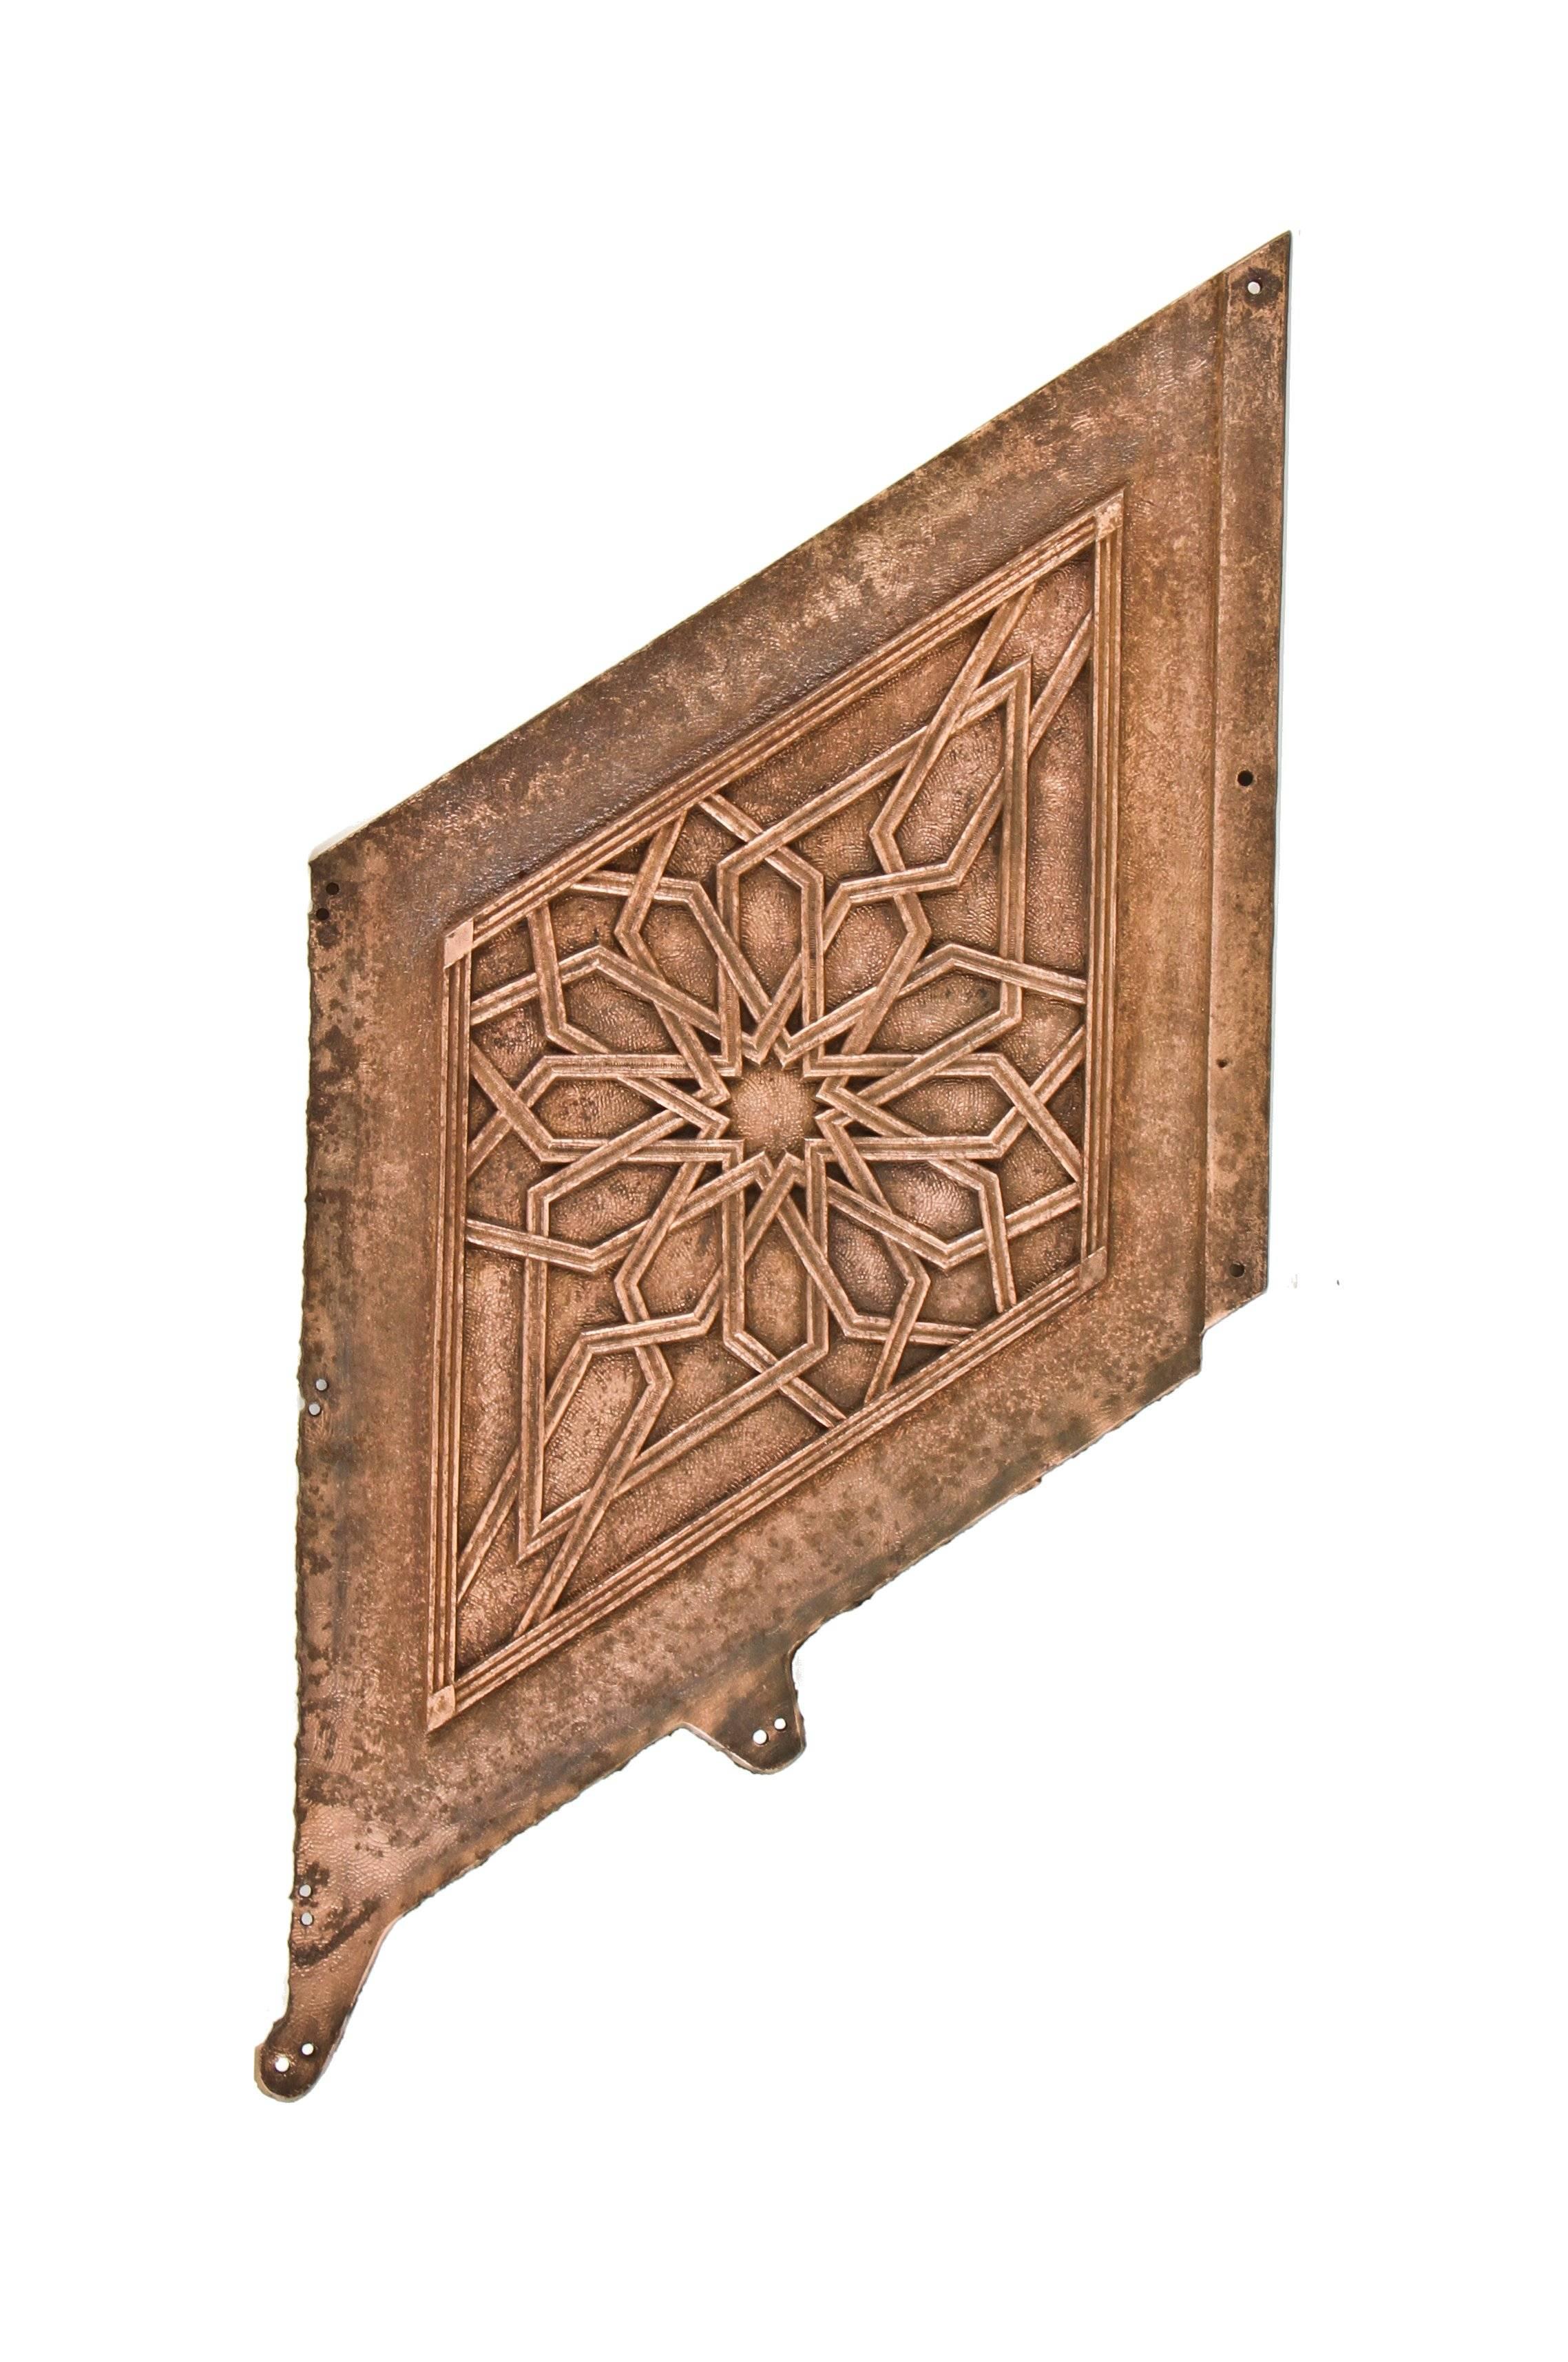 Renaissance Revival 19th Century Cast Iron Wainscot Staircase Panel from Historic Rookery Building For Sale